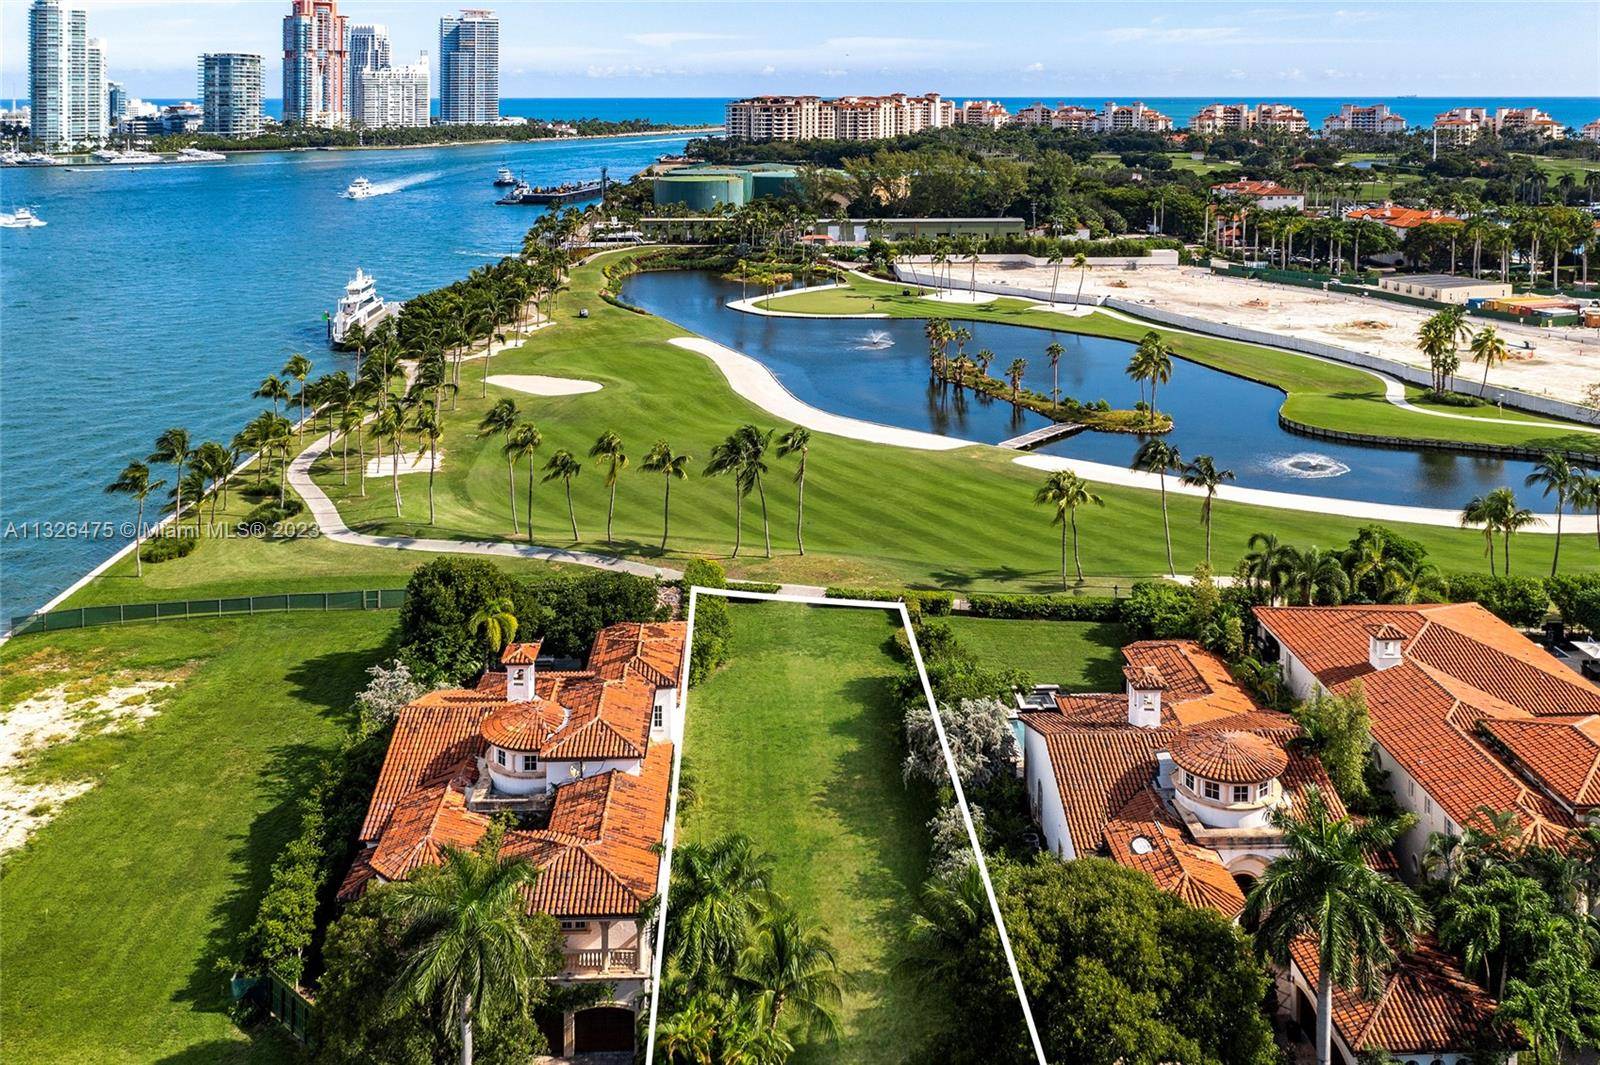 This is a rare opportunity to purchase and build your dream estate on only 1 of 2 available parcels of land in the exclusive Valencia Estates section of Fisher Island.